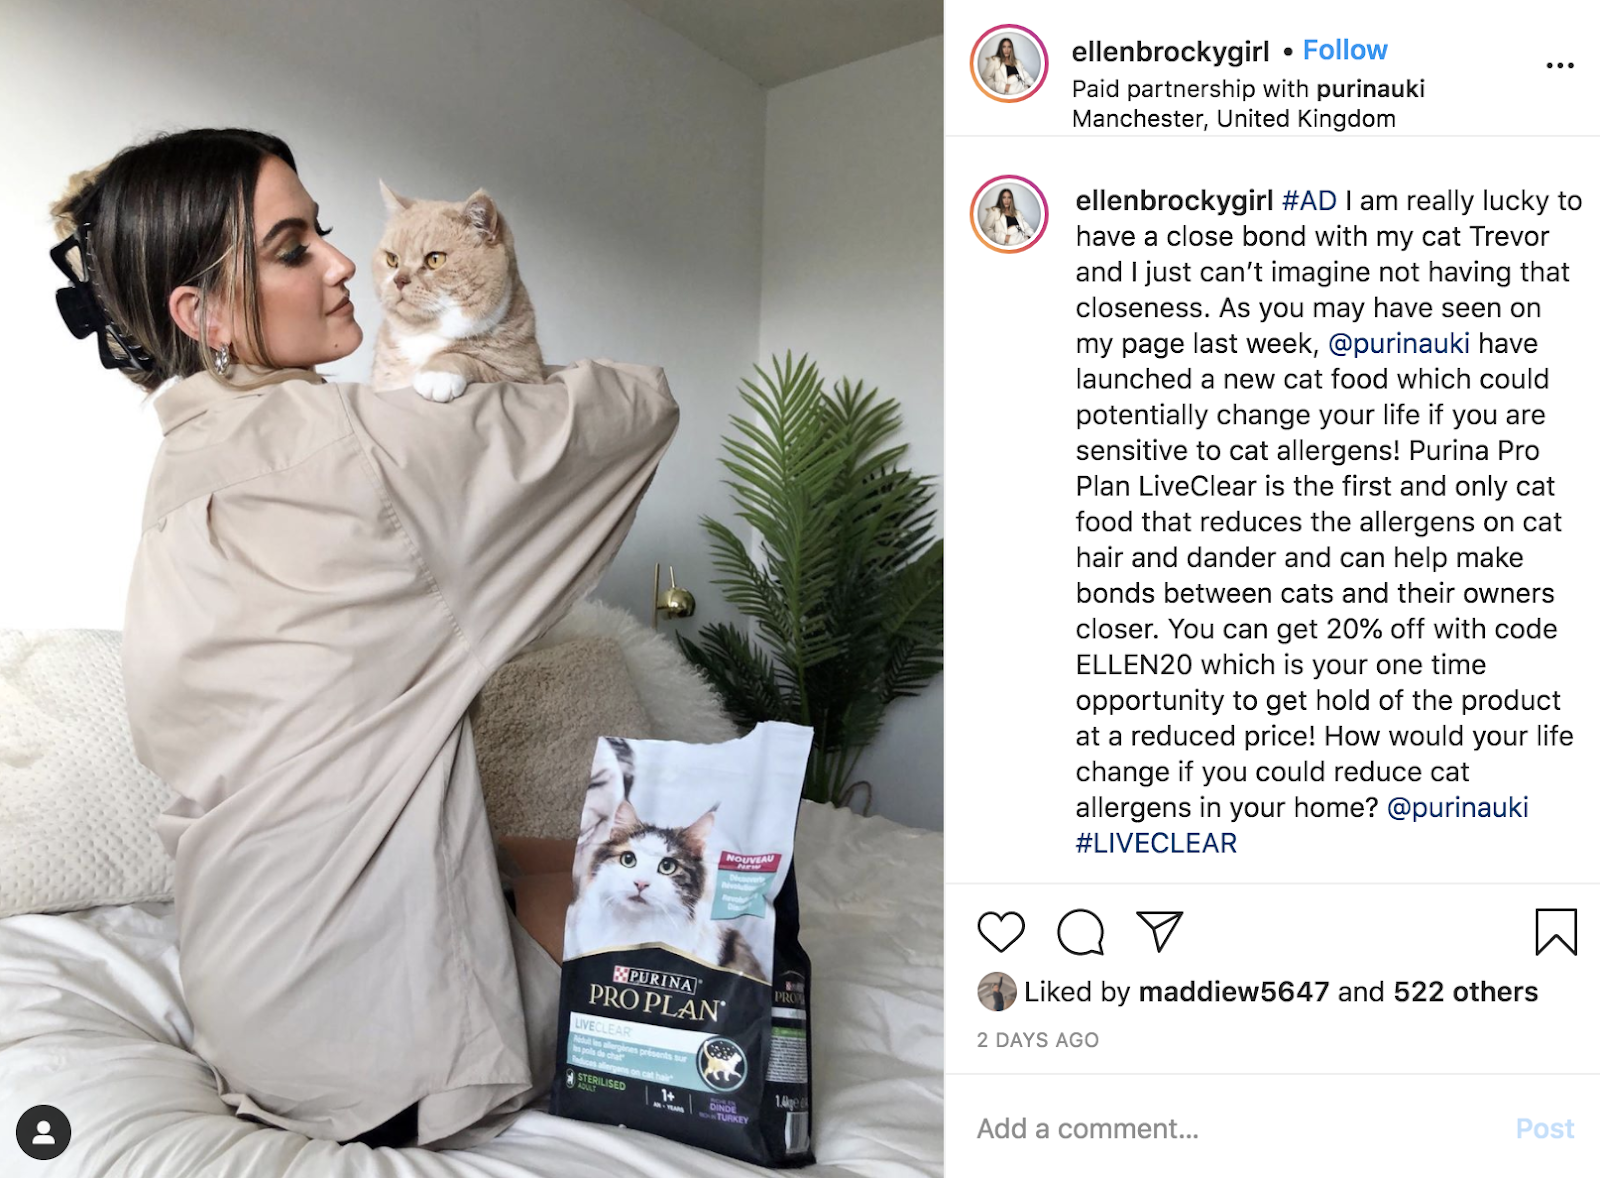 instagram sponsored ad by an influencer for a cat food product